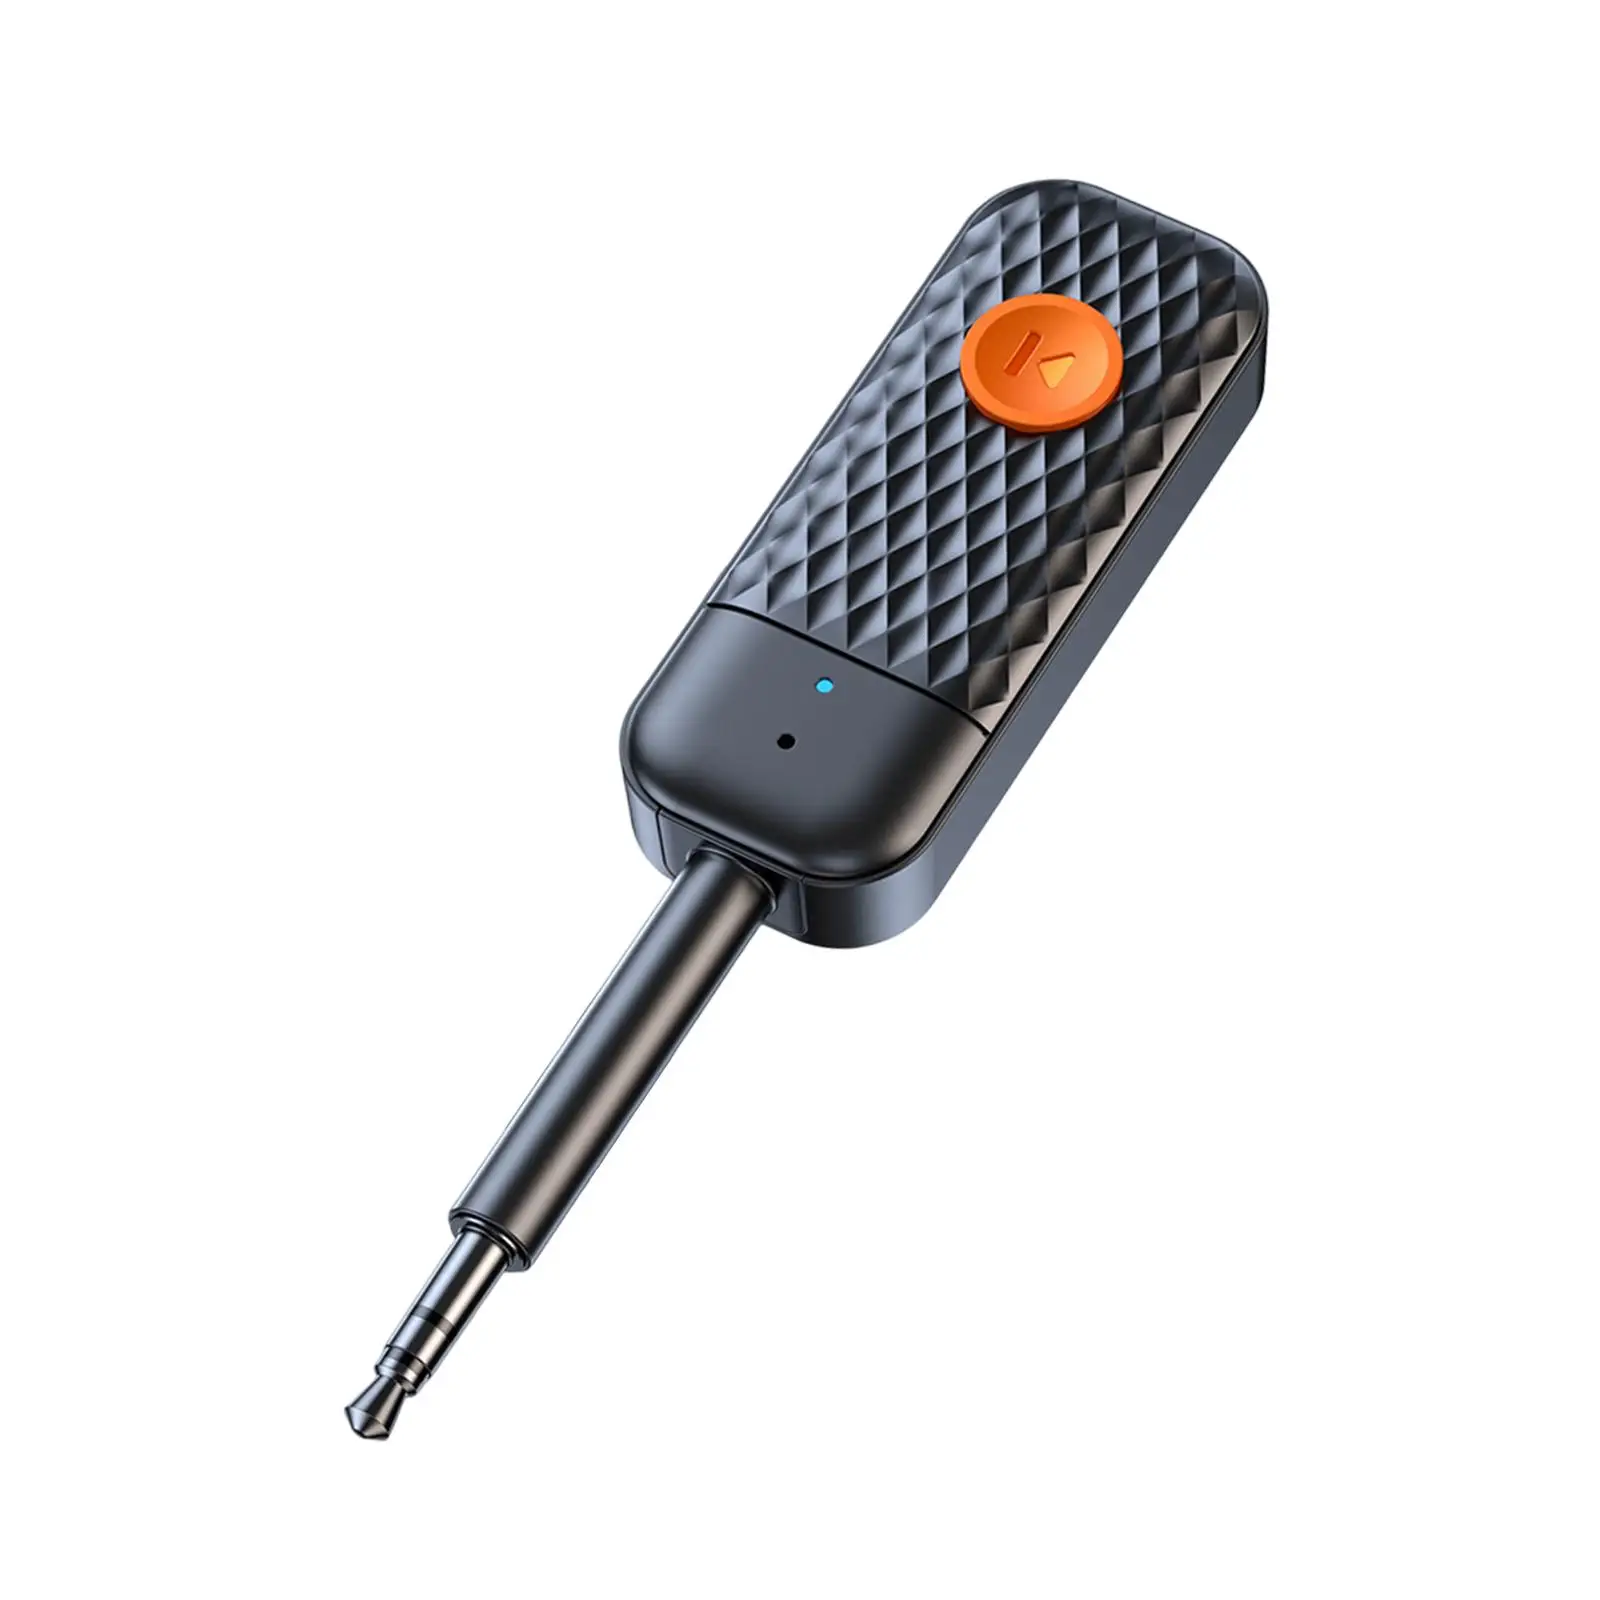 Wireless 3.5mm Car AUX Adapter Bluetooth Good Companion for Drivers Good performance Compact Transmitter and Receiver